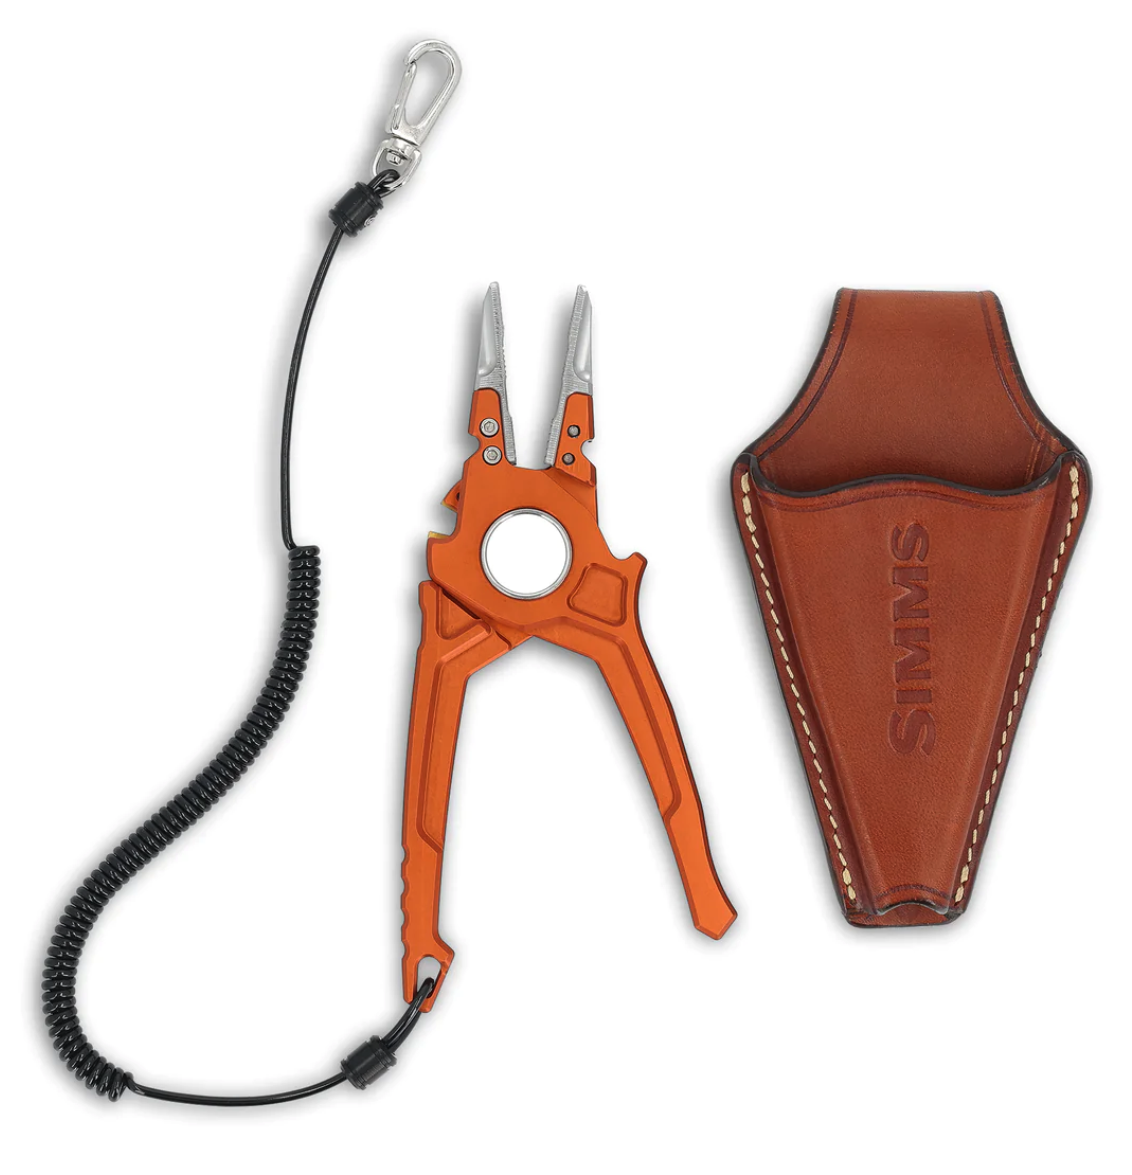 Buy  Simms Guide Pliers online at the best price with TheFlyFishers.com